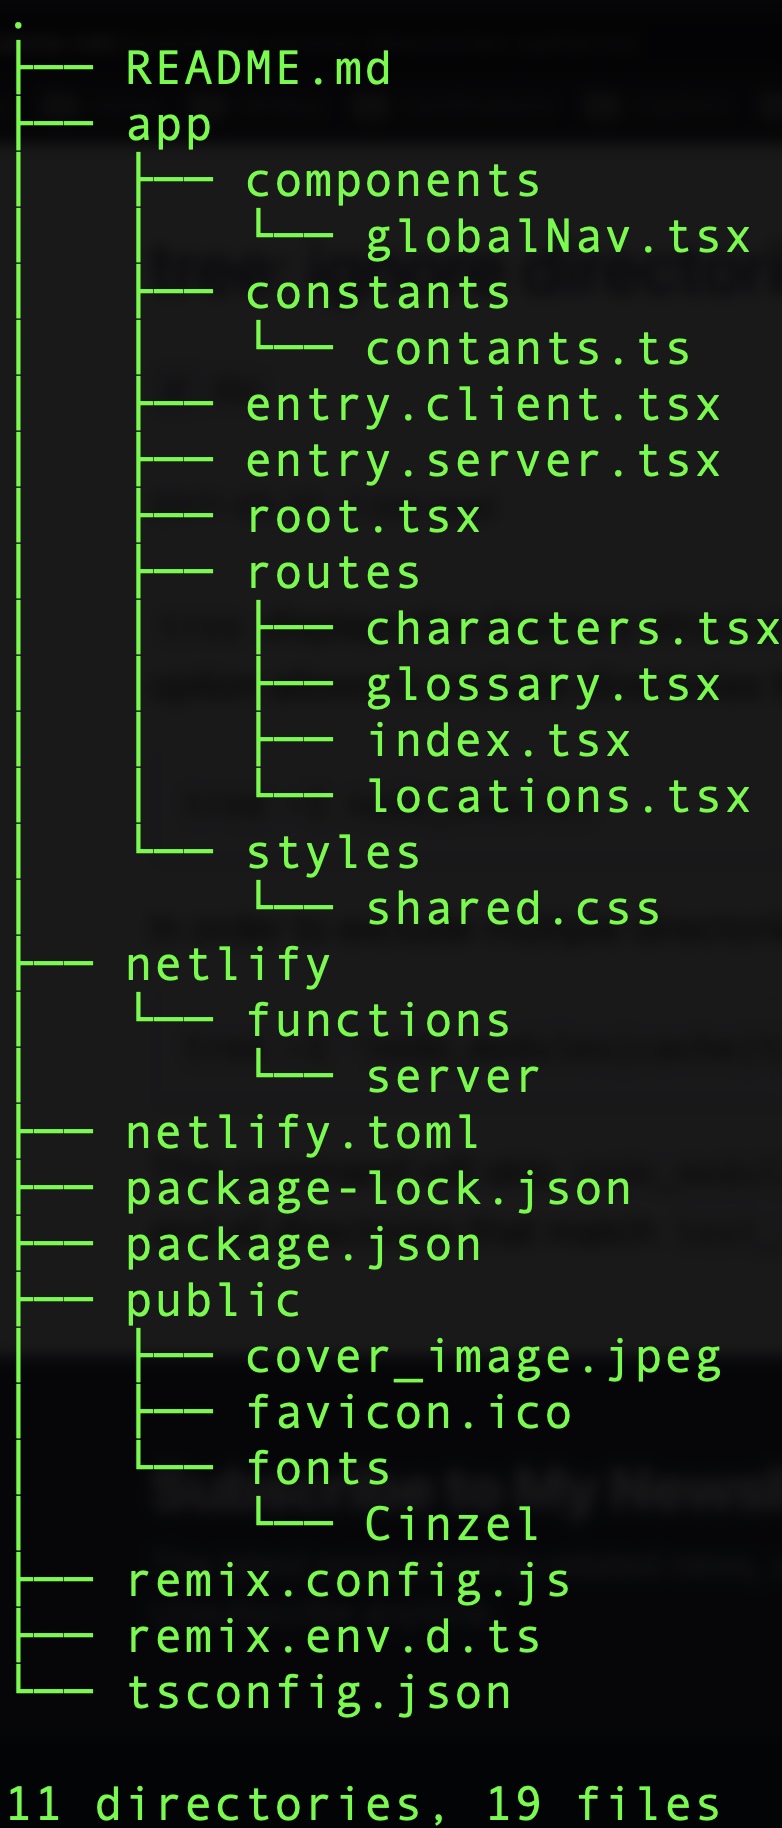 Sample application files listed in the terminal output